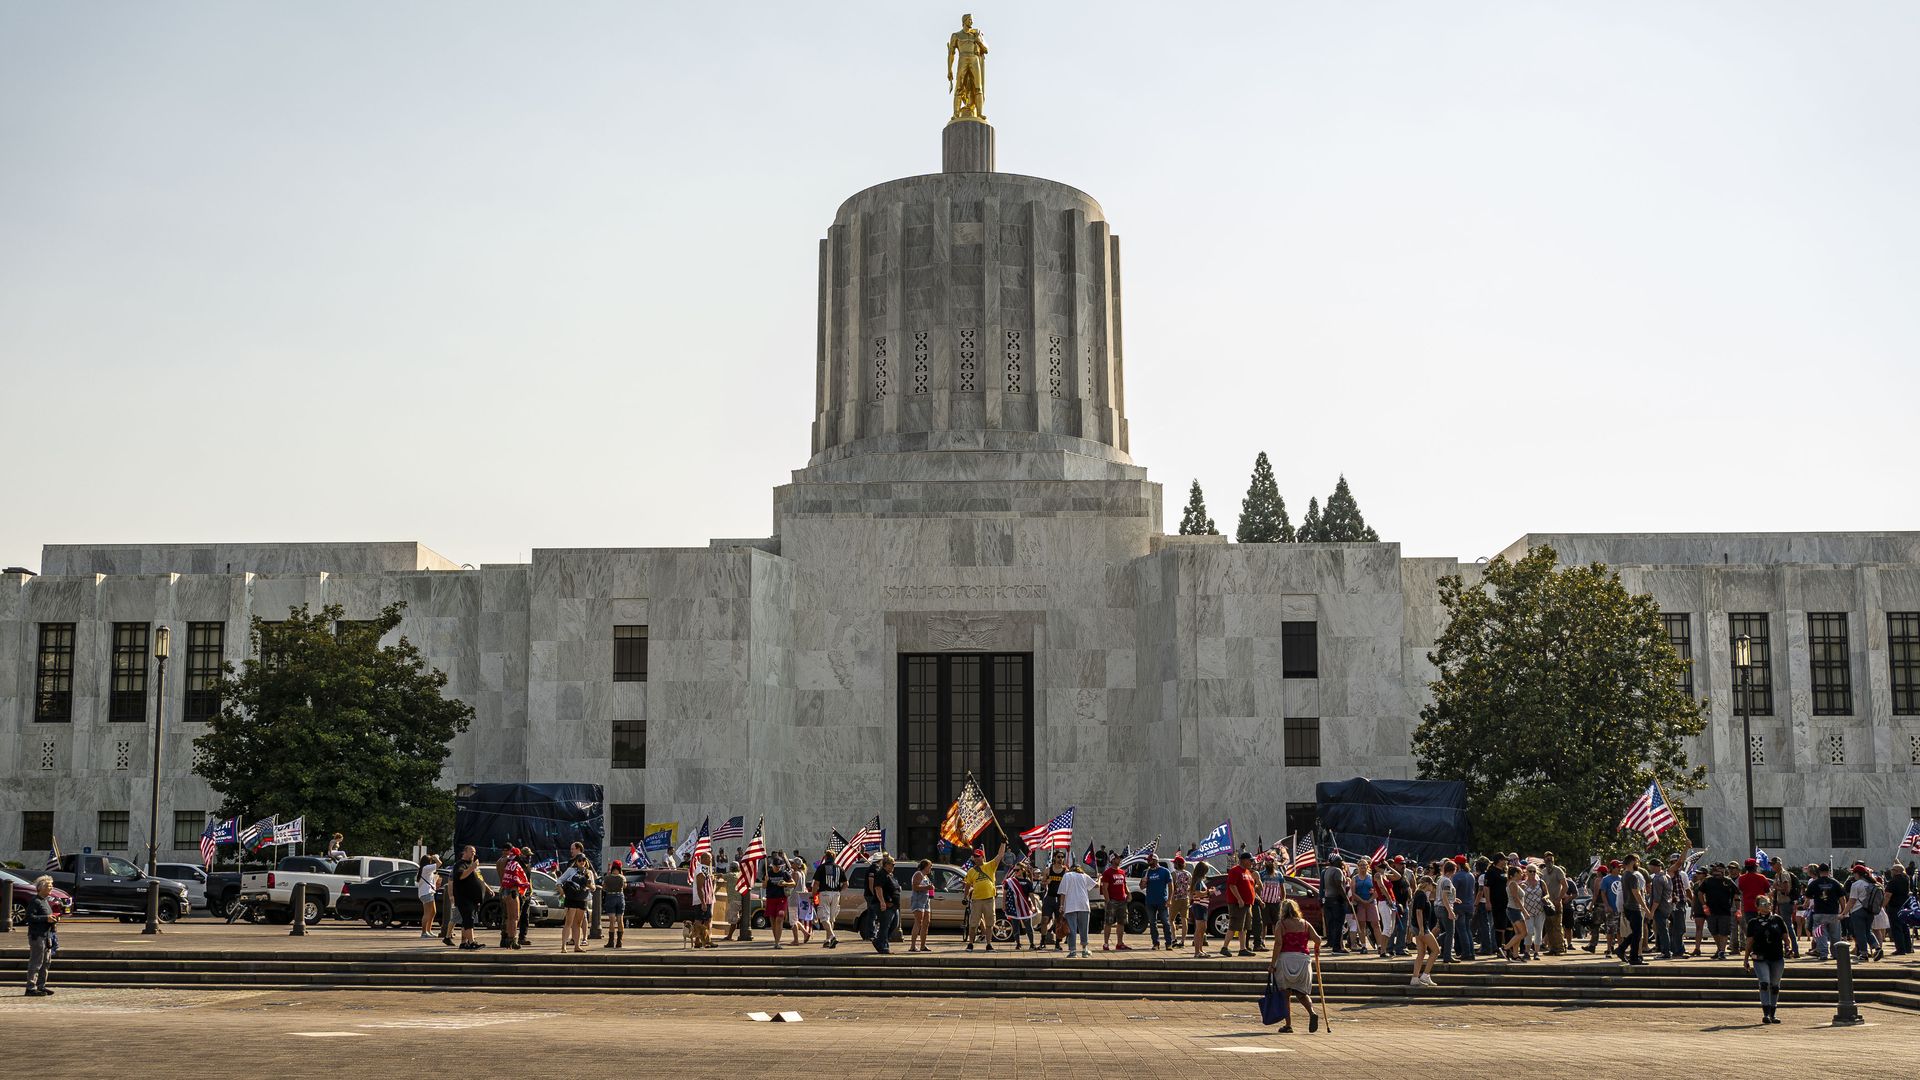 Demonstrators gather as a pro-Trump caravan rally convenes at the Oregon State Capitol building on September 7, 2020 in Salem, Oregon.